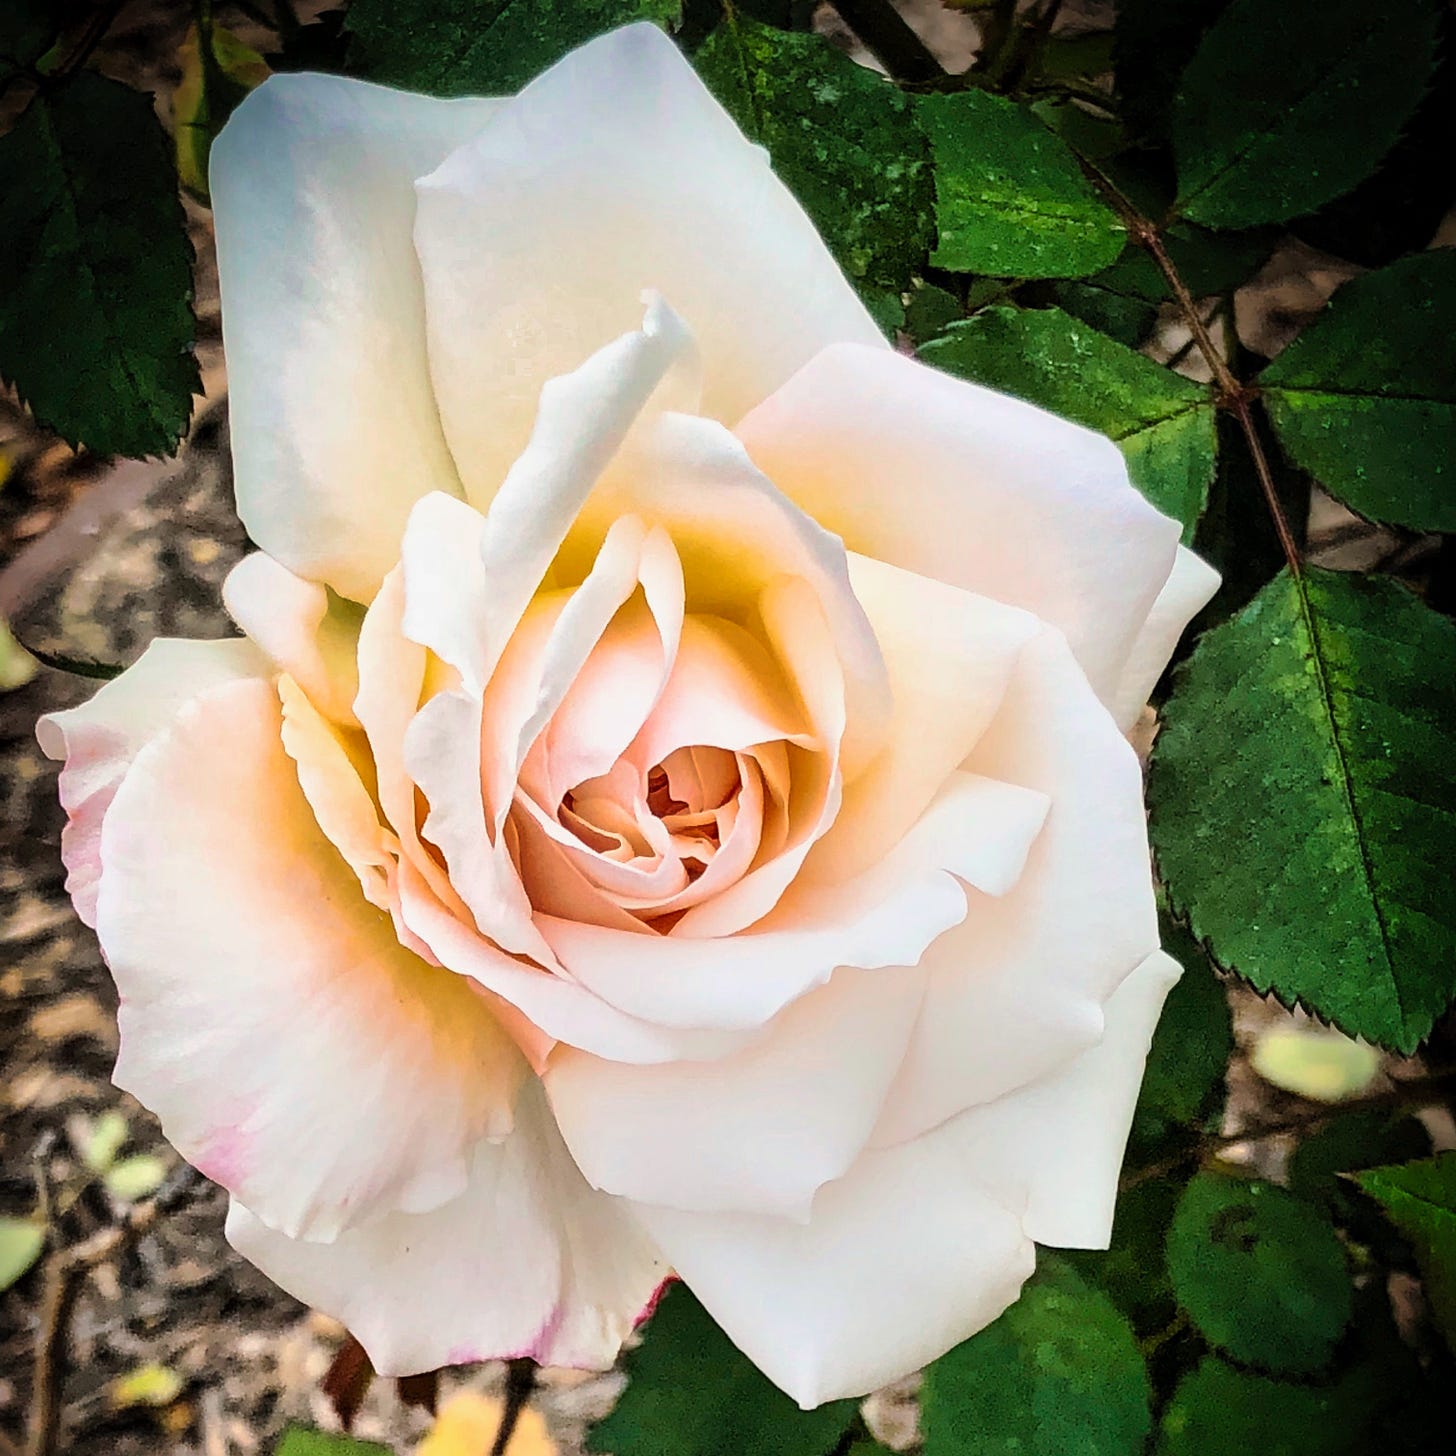 A single pale pink rose still on the bush. Petals unfolding with a darker pink trimming the edges nestled in dark green leaves on the right